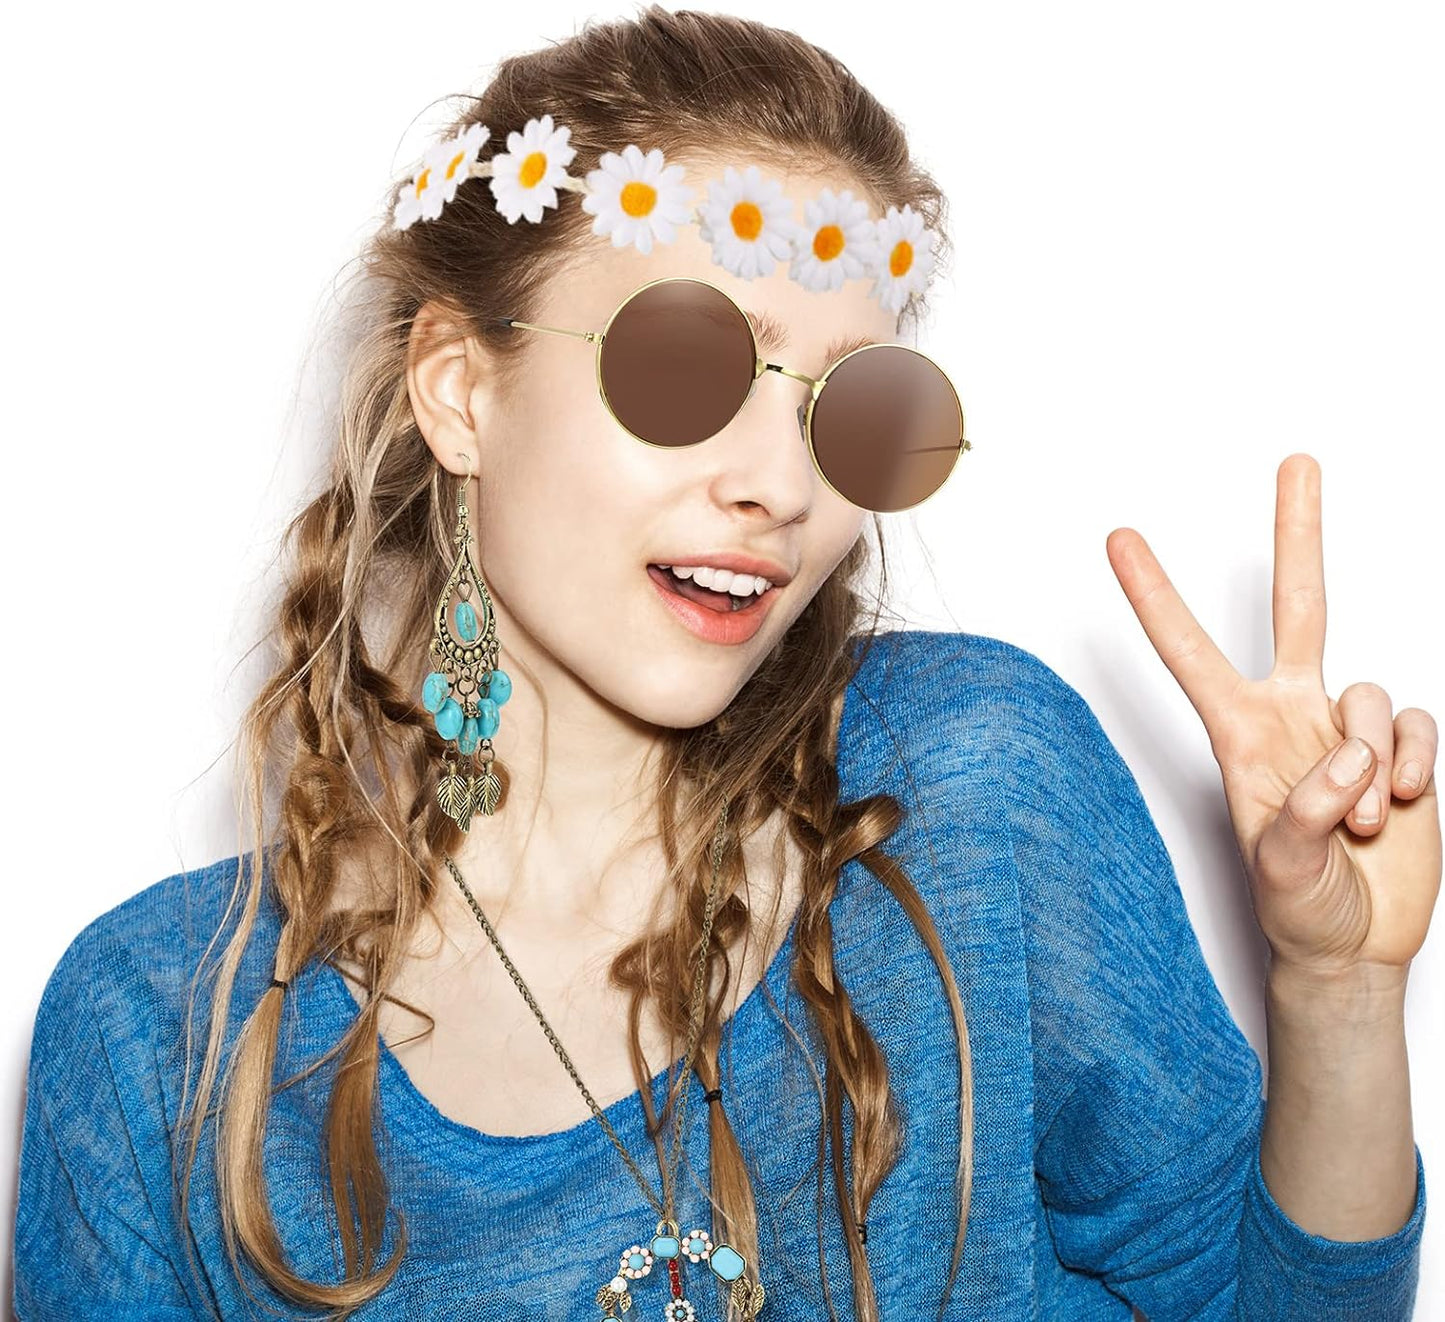 Hippie Costume Set Include Sunglasses, Headband, Peace Sign Necklace and Earring (Turquoise Style)